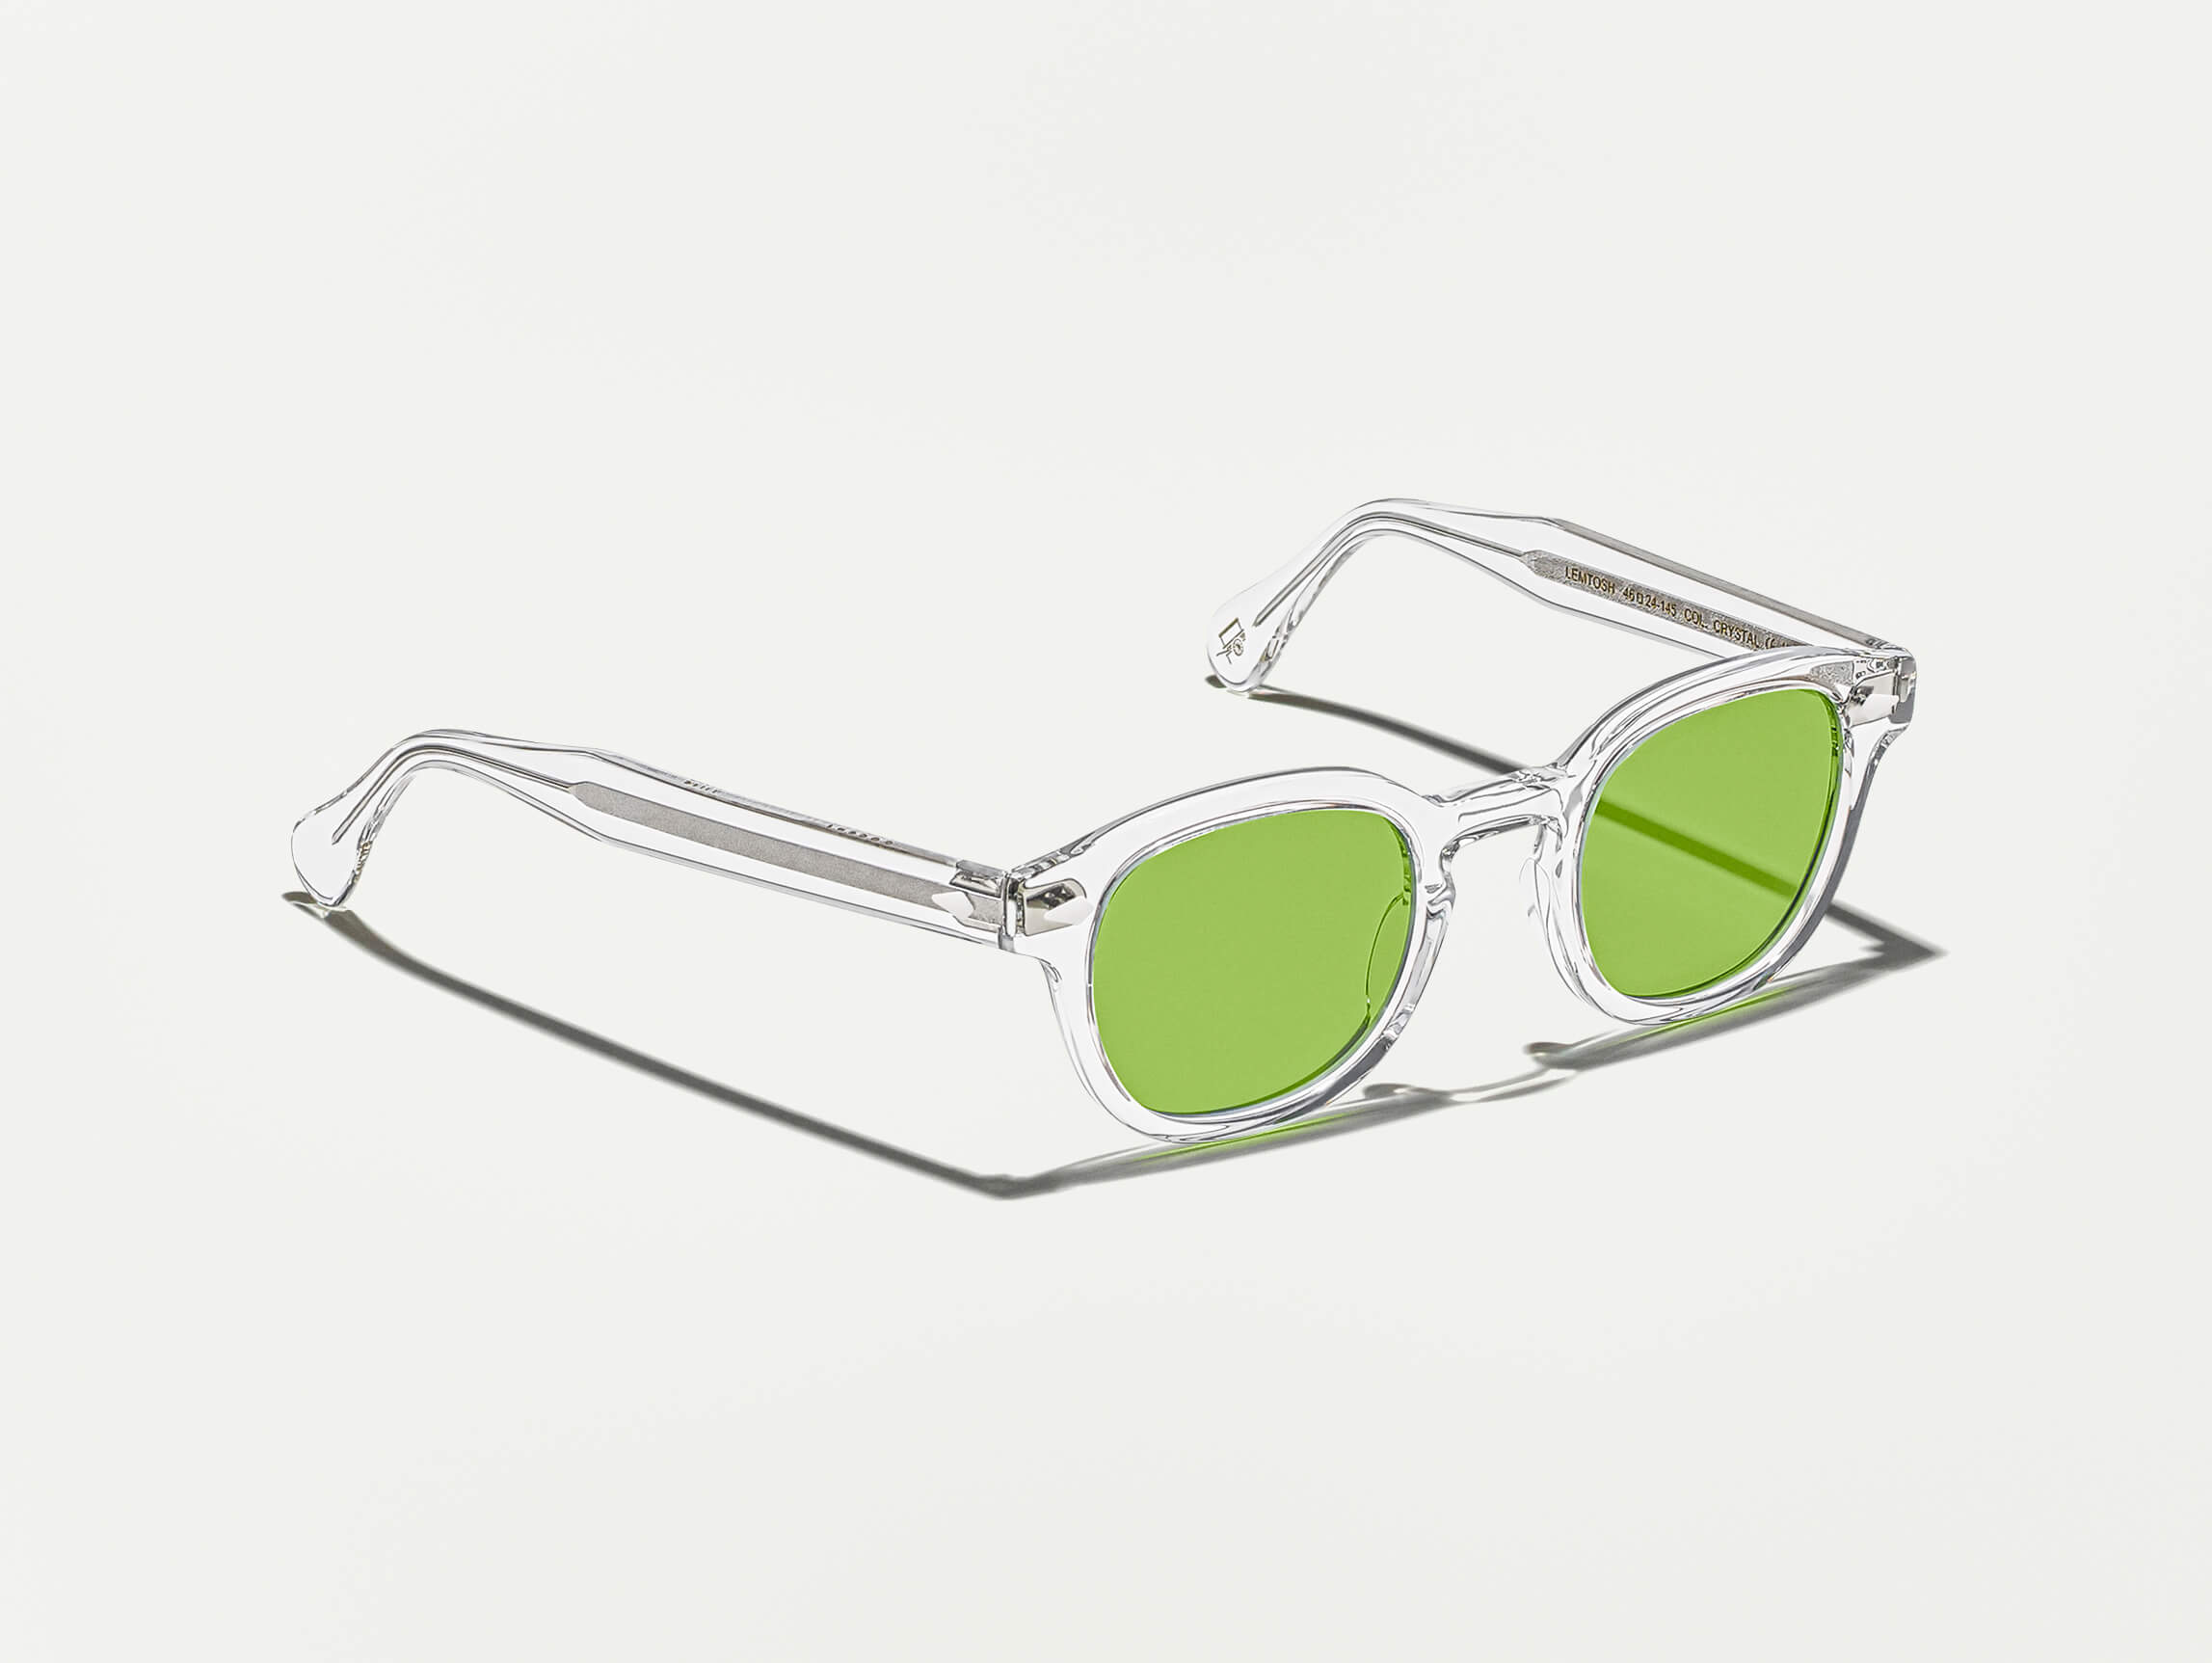 The LEMTOSH Crystal with Garnet Green Tinted Lenses